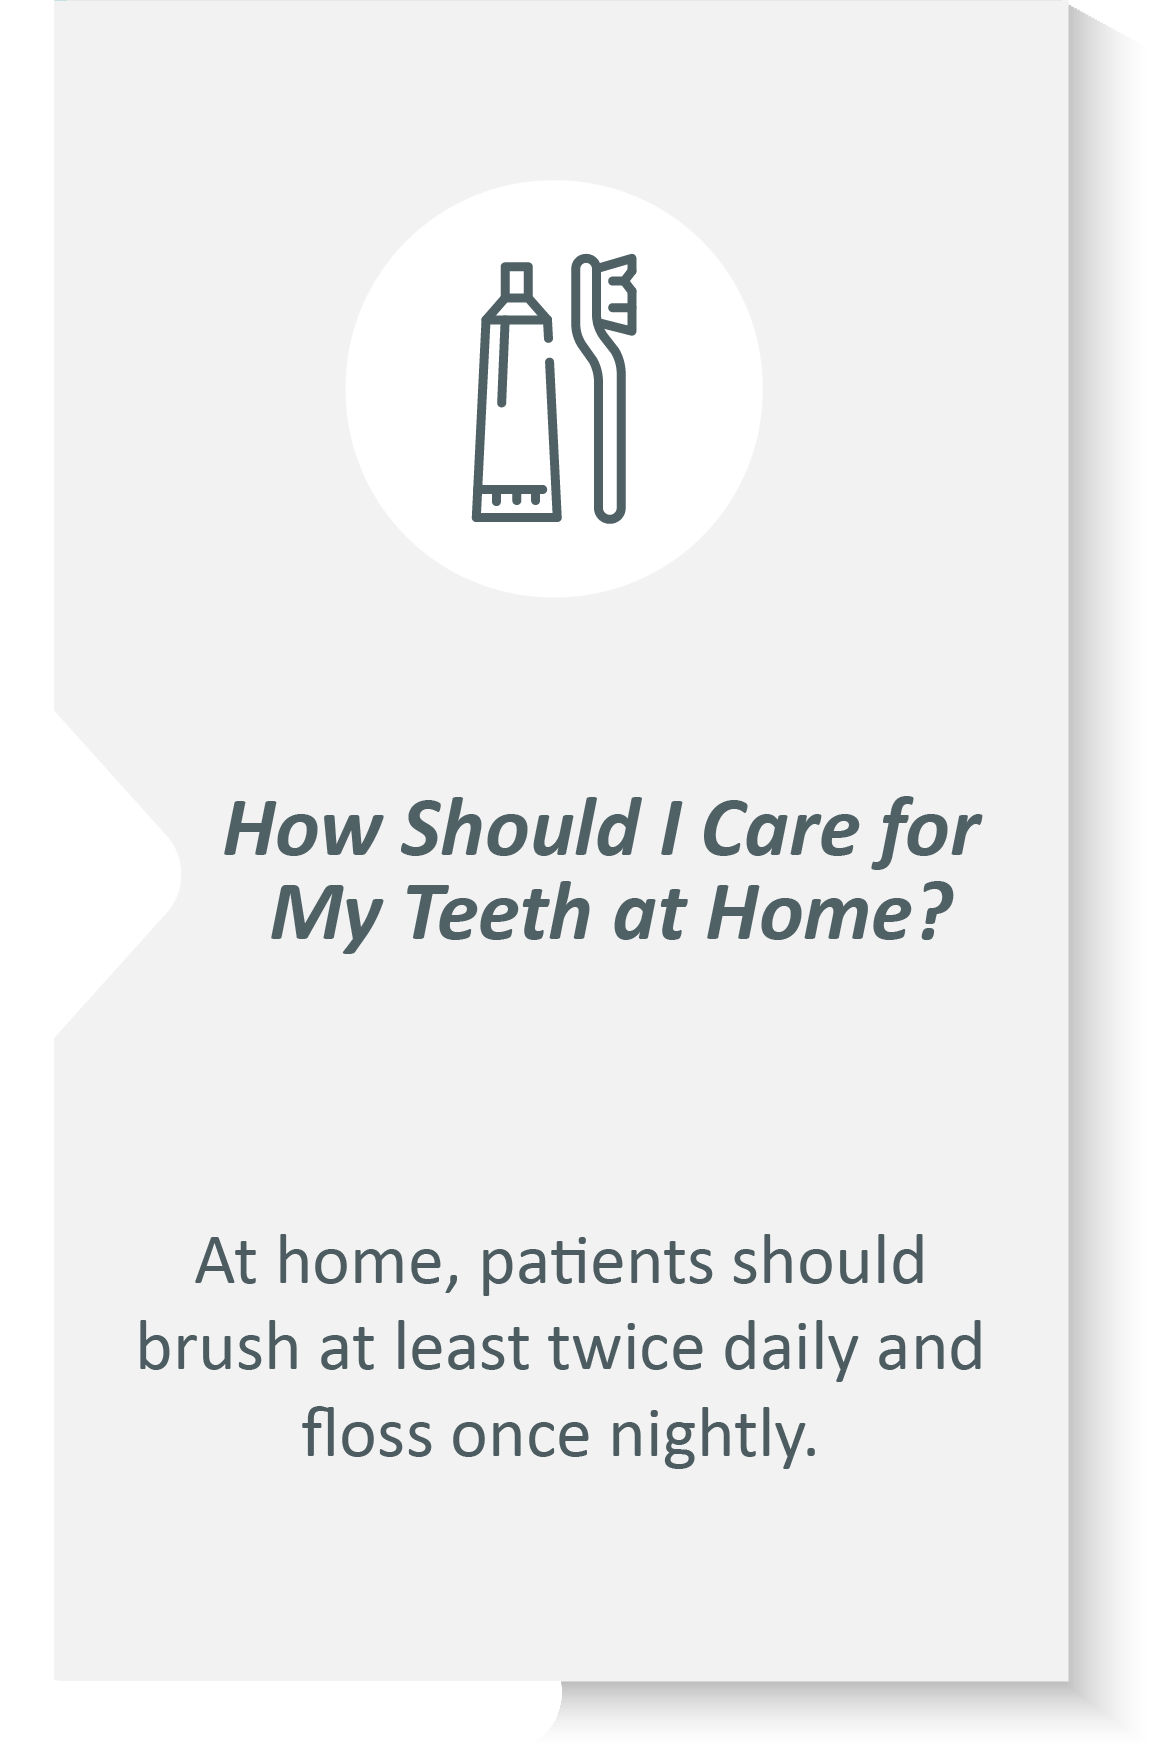 Dental cleaning infographic: At home, patients should brush at least twice daily and floss once nightly.